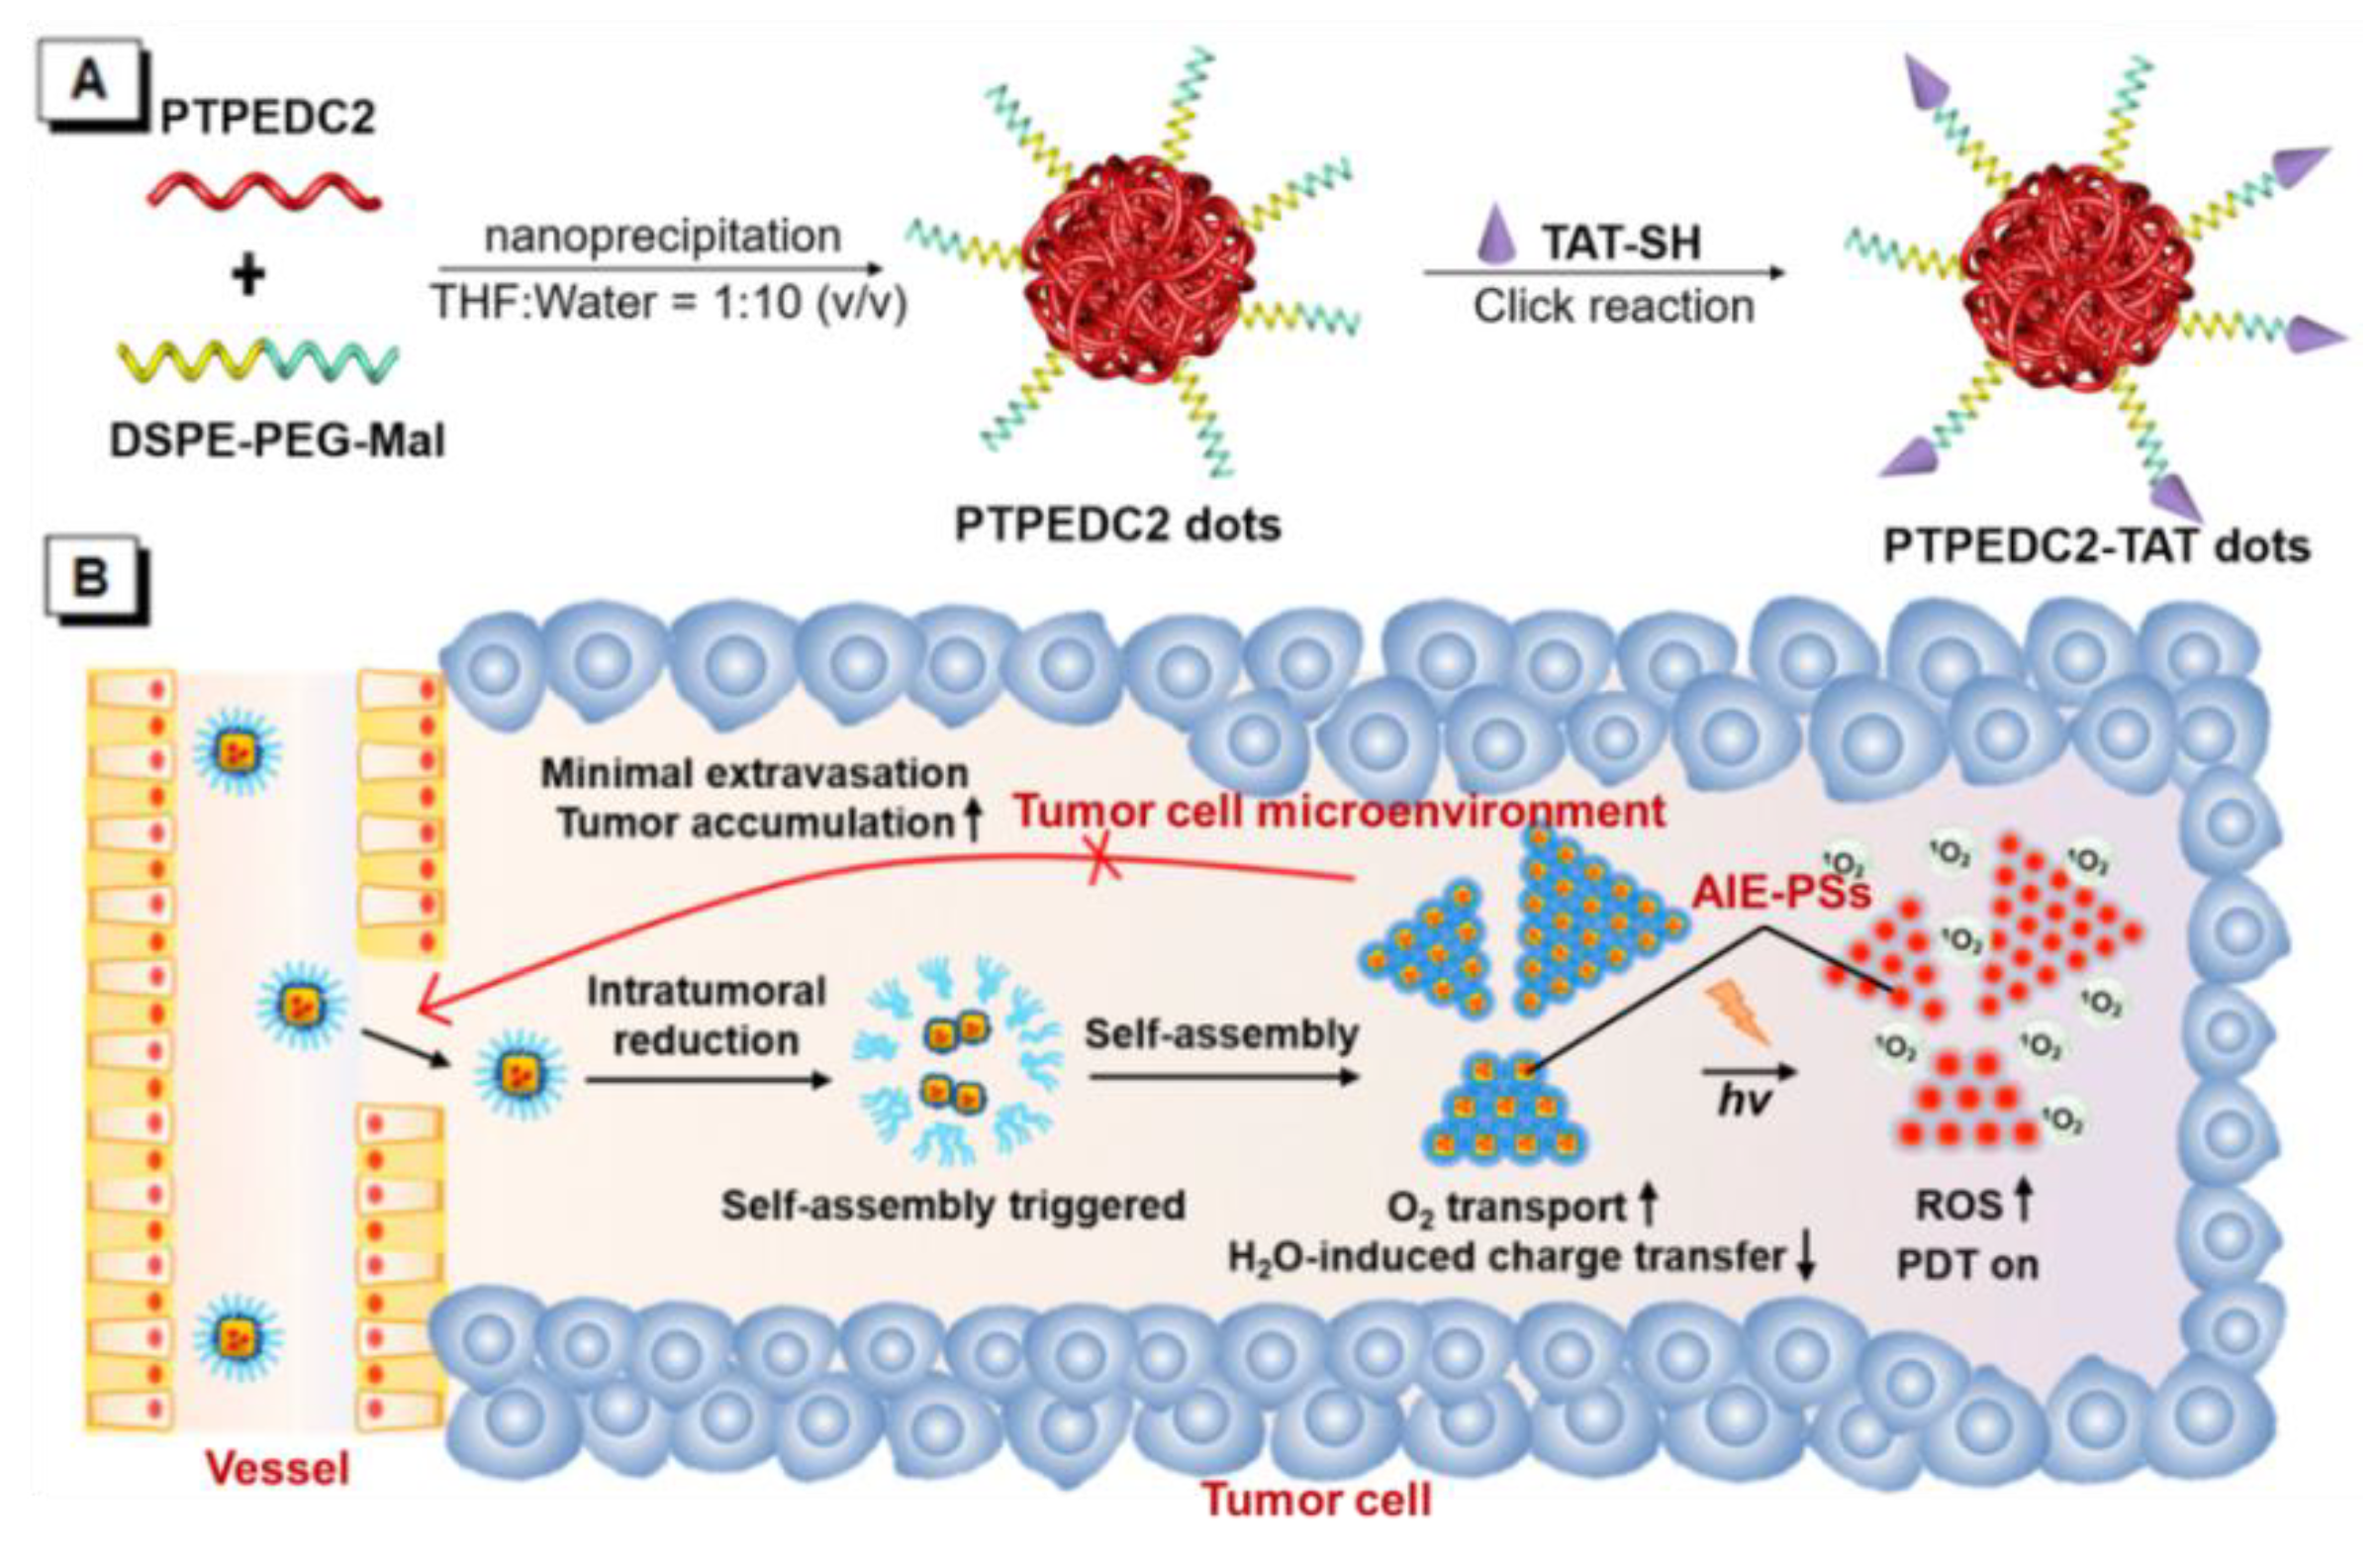 Mitochondrion‐Anchoring Photosensitizer with Aggregation‐Induced Emission  Characteristics Synergistically Boosts the Radiosensitivity of Cancer Cells  to Ionizing Radiation - Yu - 2017 - Advanced Materials - Wiley Online  Library